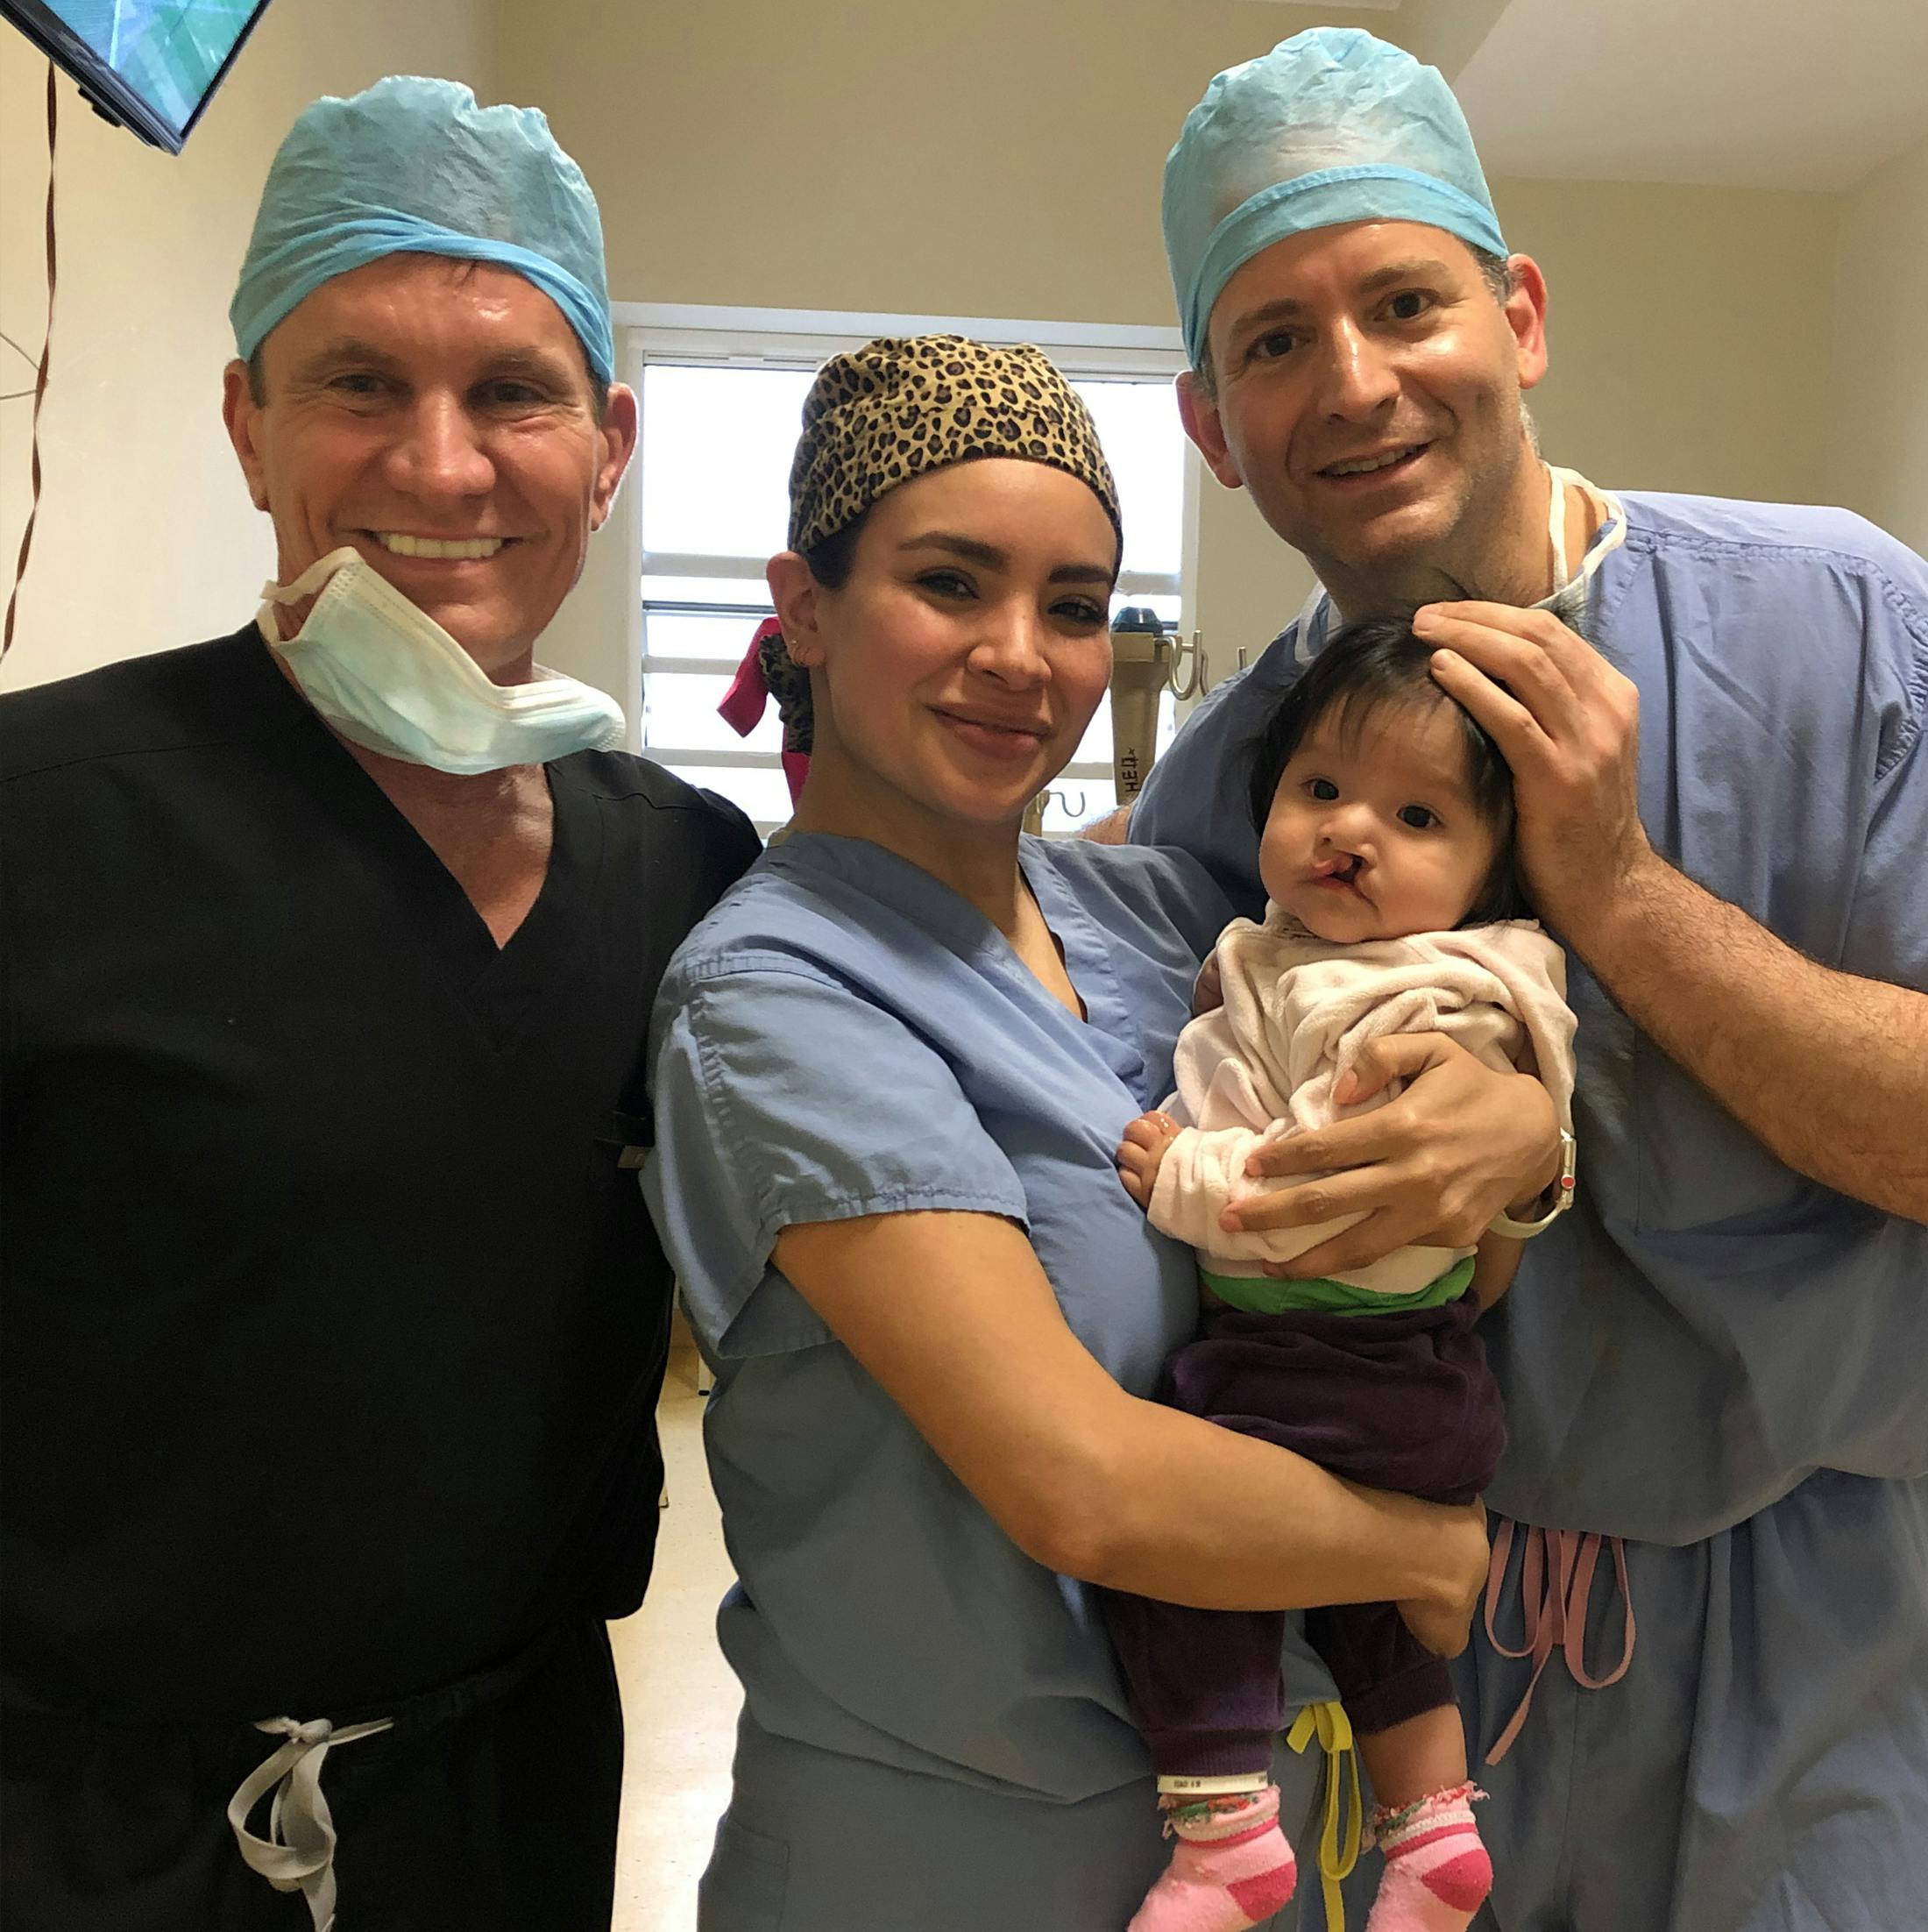 Dr. Shapiro and His Team Holding a Baby